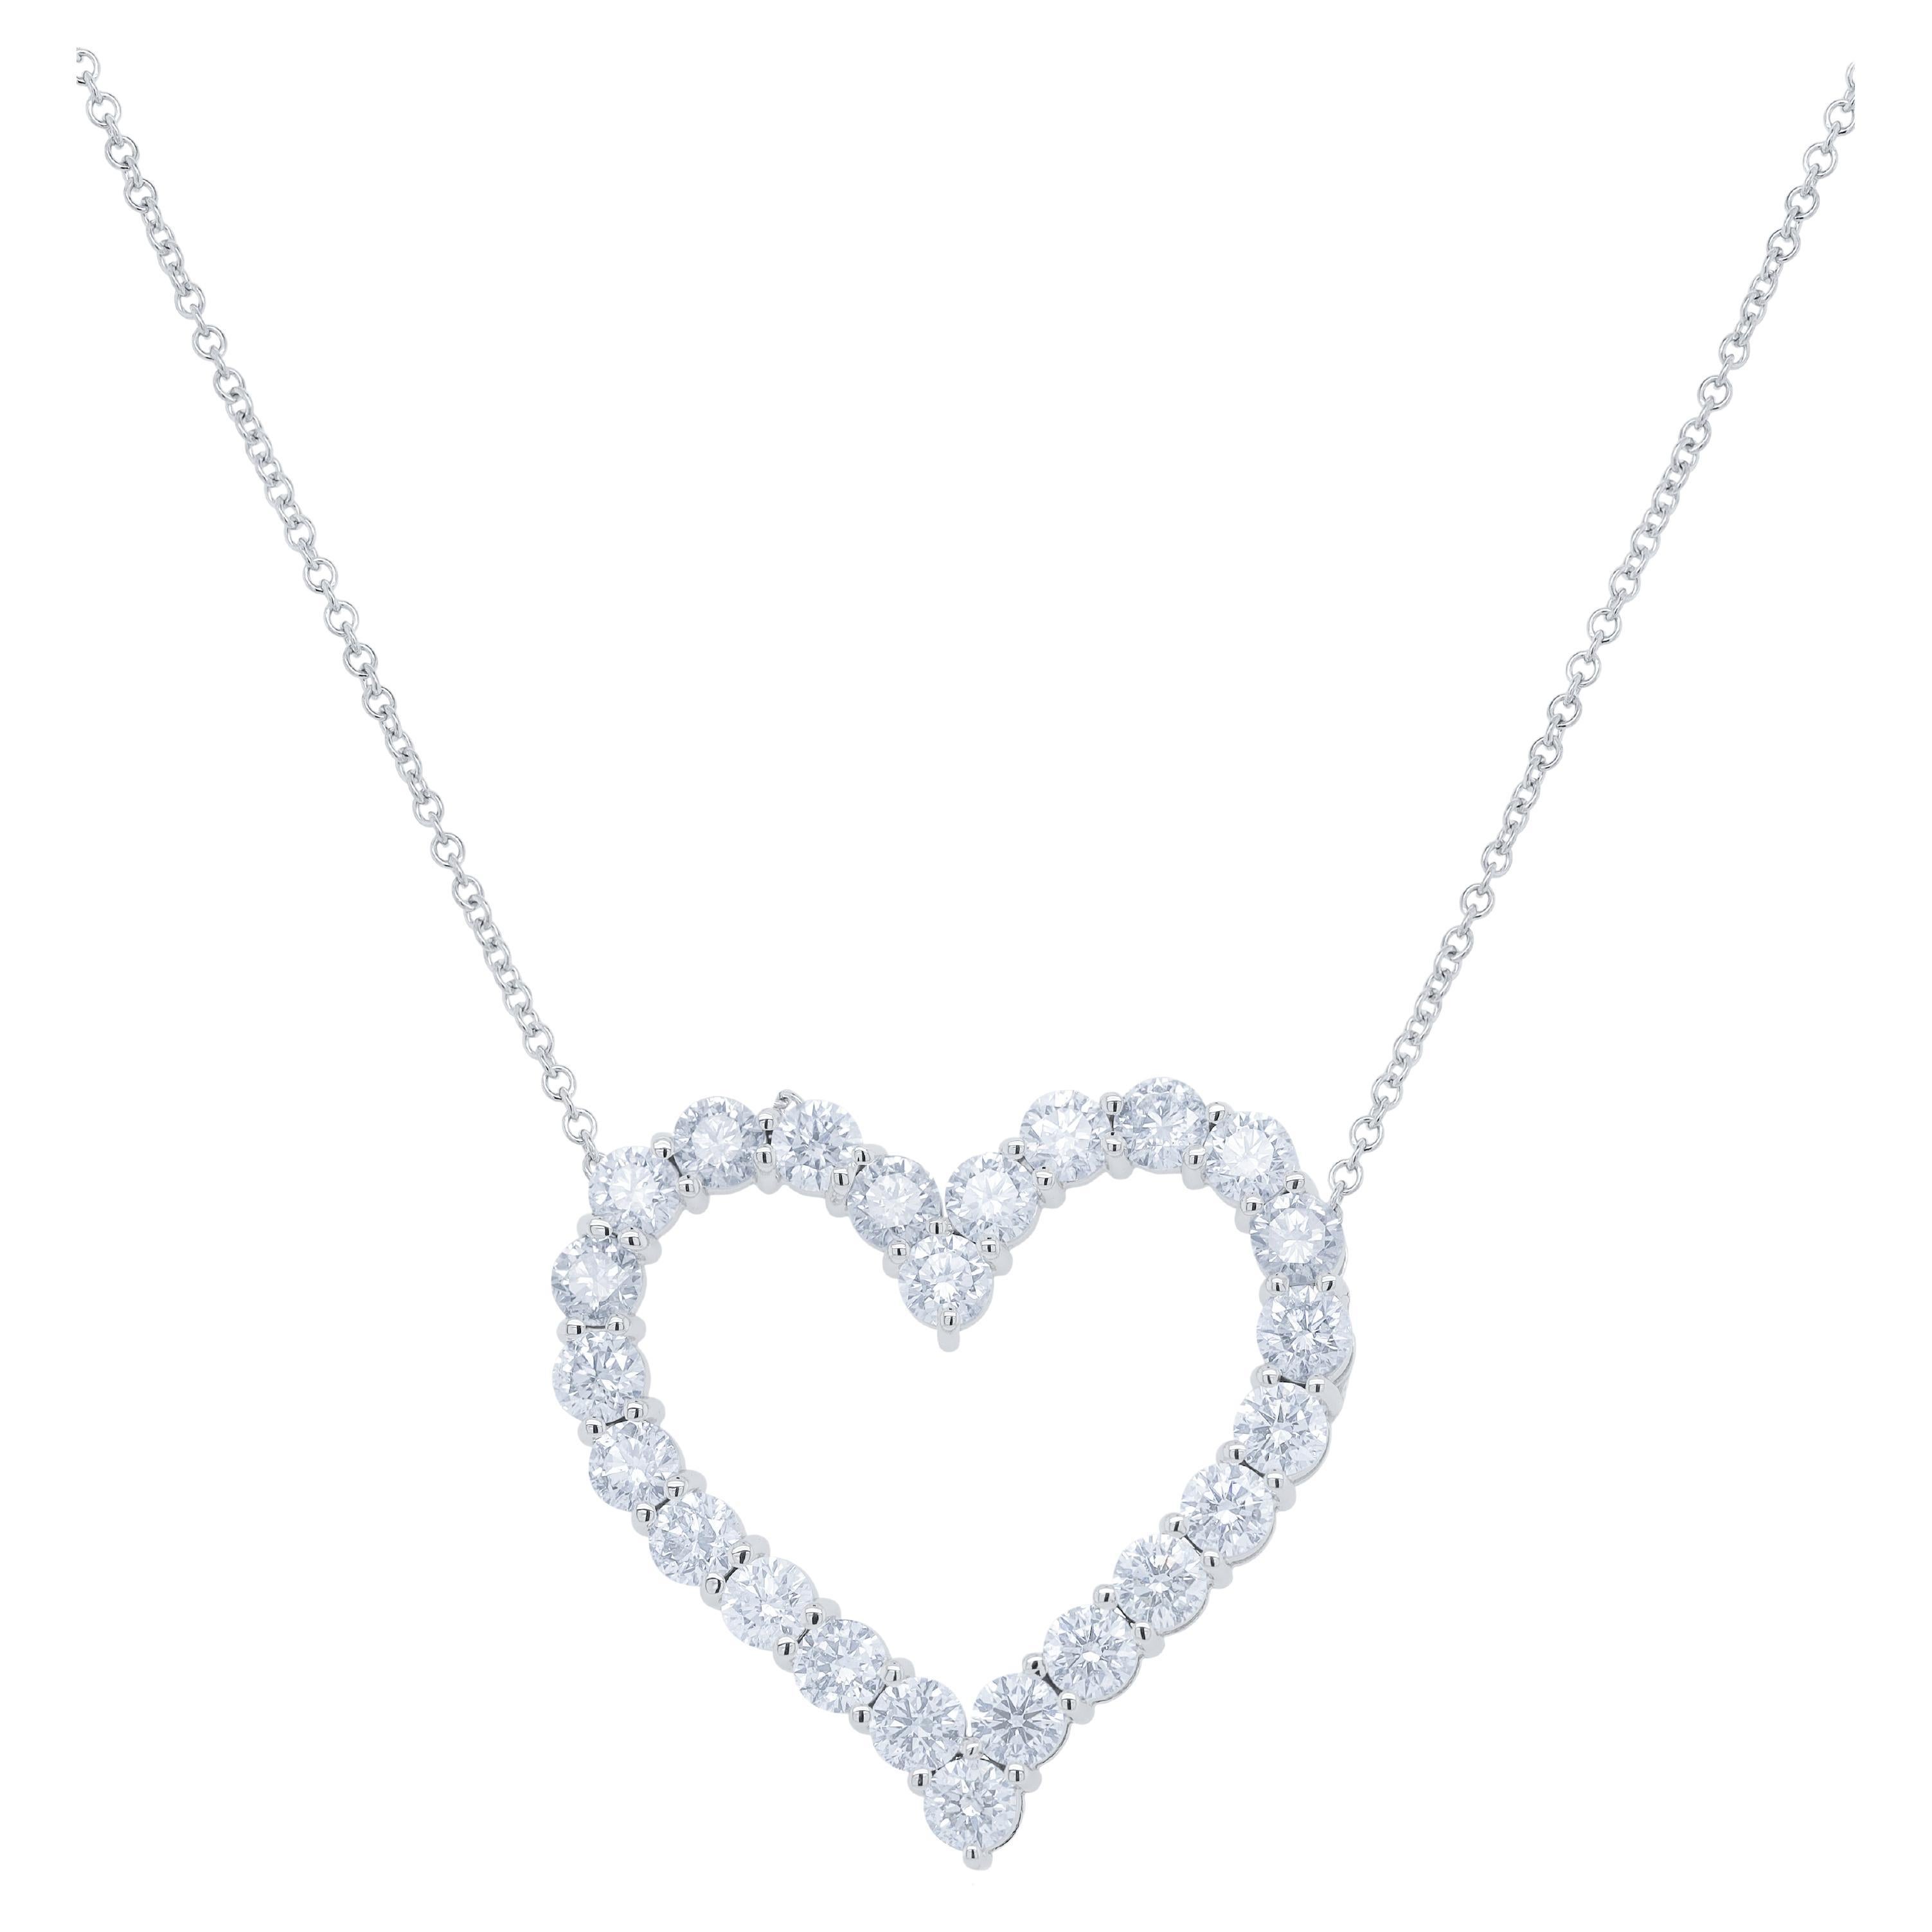 Diana M. 18kt white gold open heart pendant featuring 2.30 cts of round diamonds For Sale